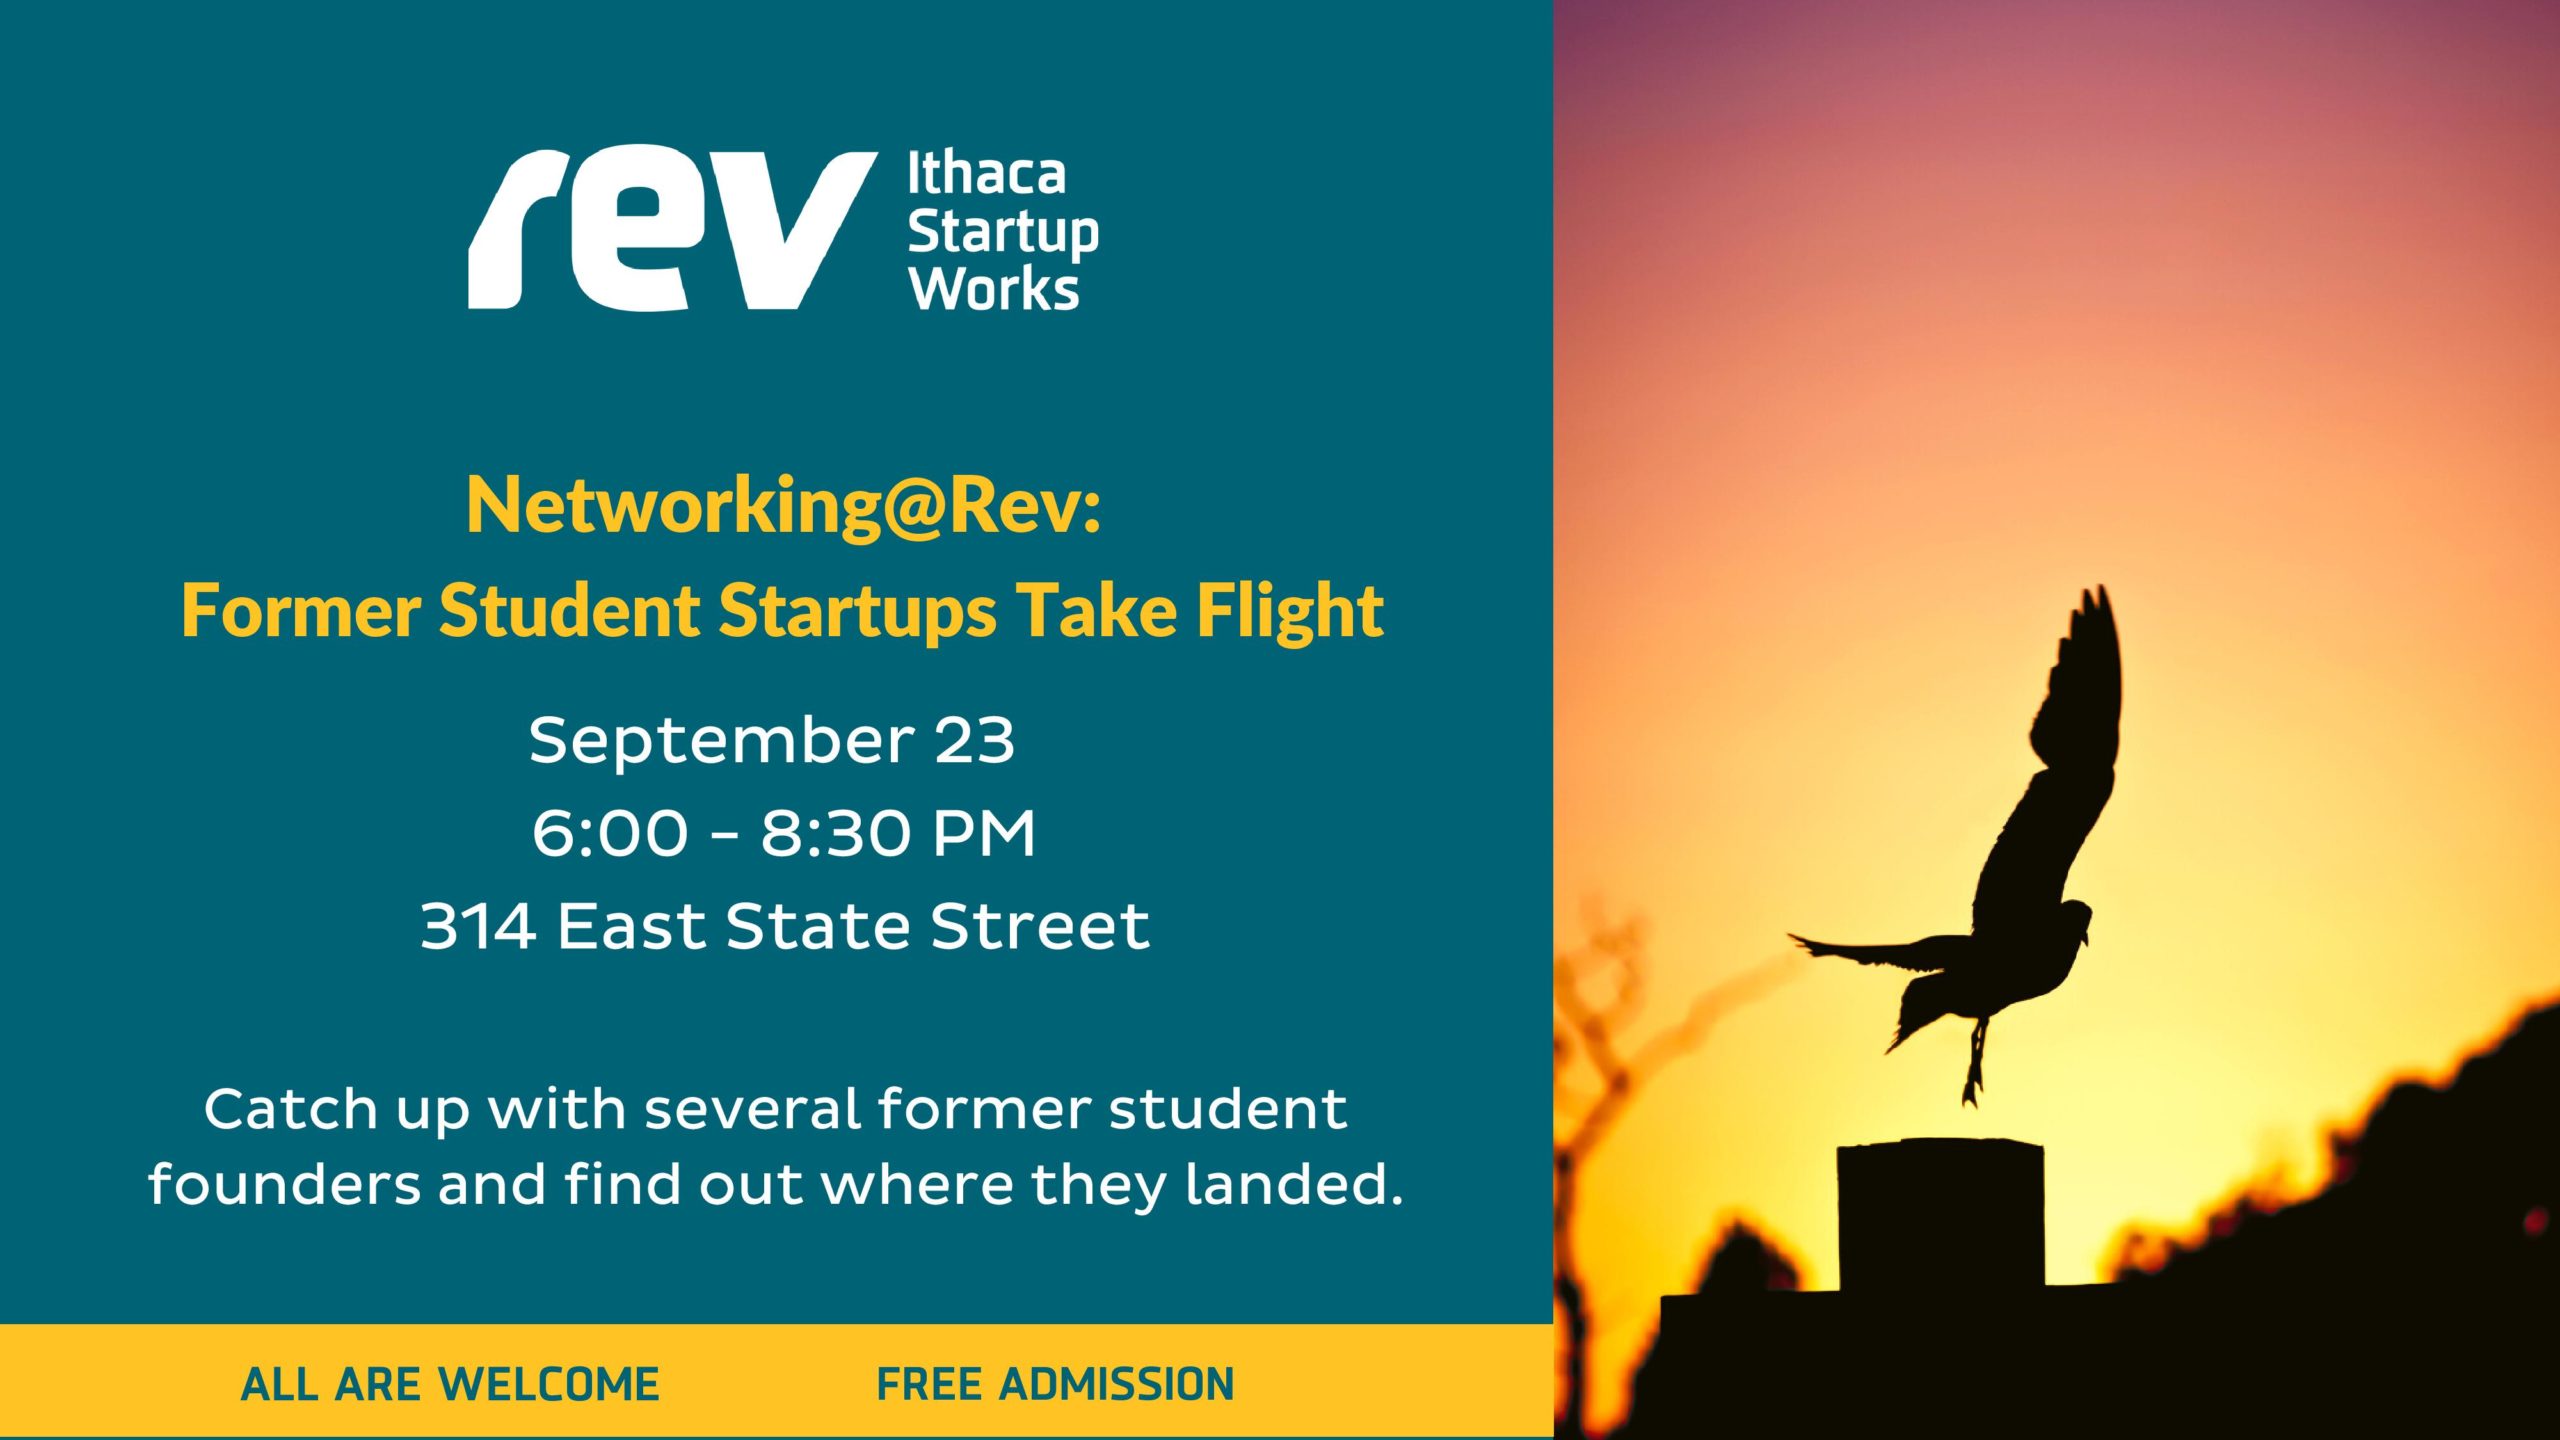 Rev: Ithaca Startup Works. Networking at Rev: Former Student Startups Take Flight. Thursday, September 23 (6-8:30 pm ET). All are welcome. Free admission.